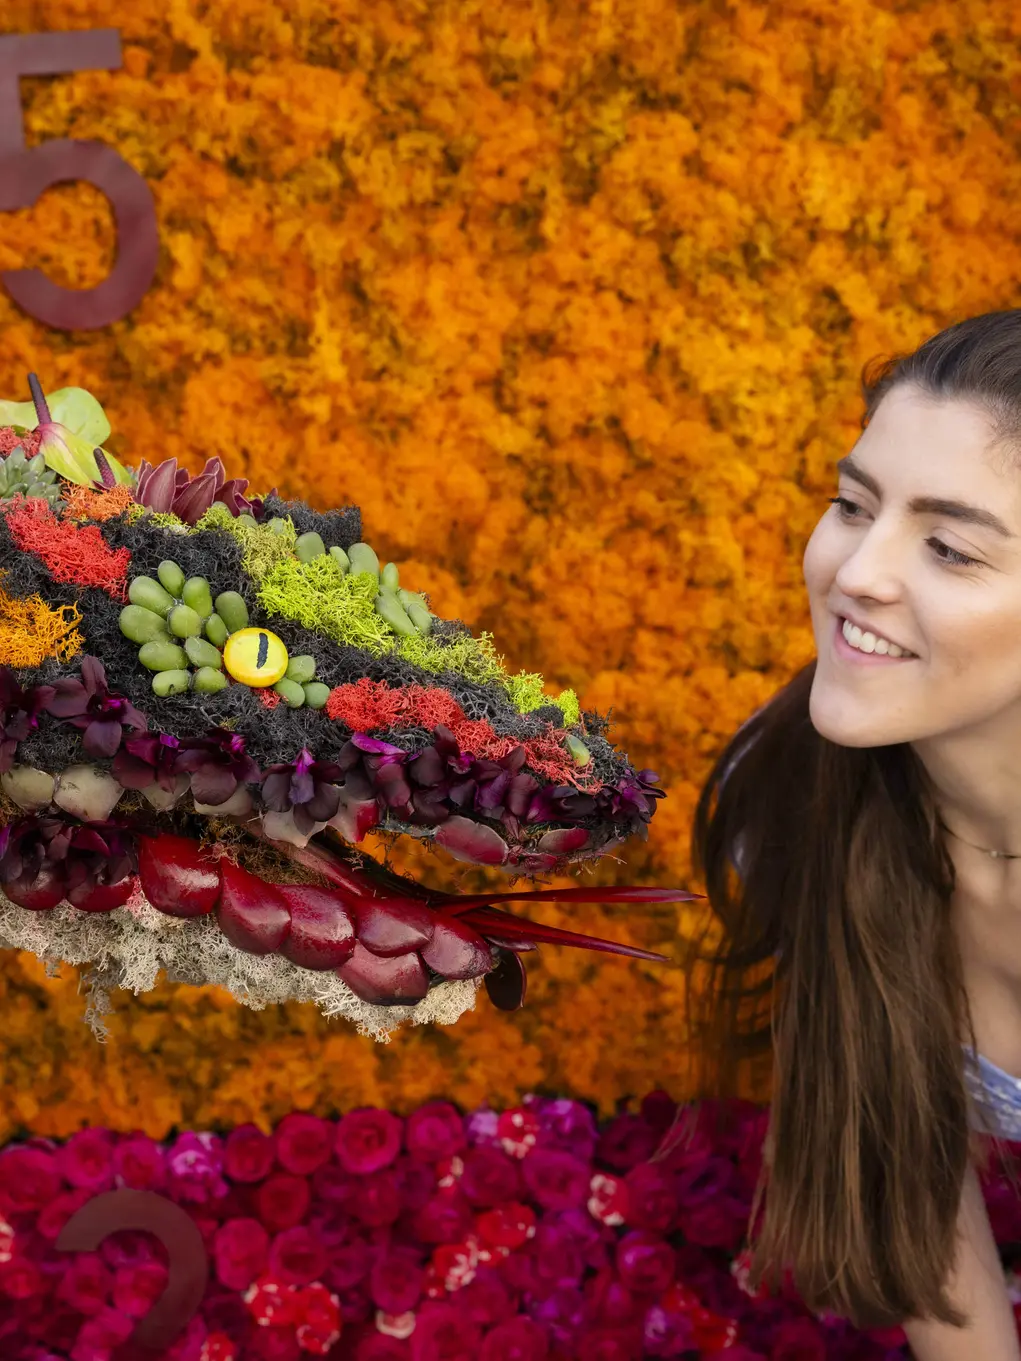 A girl in a blue dress looks at the snake floral display